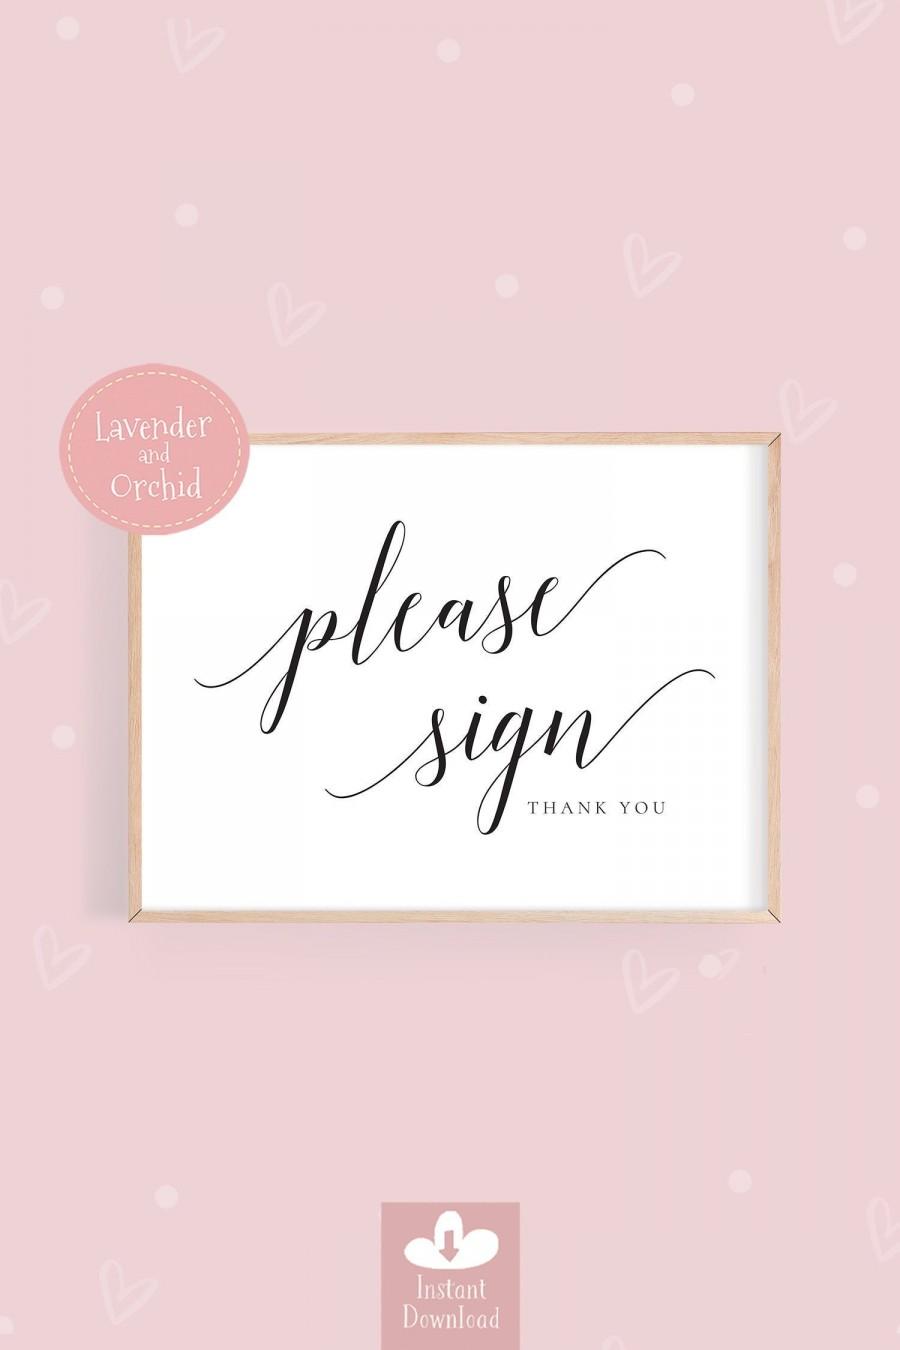 Wedding - PLEASE SIGN sign, Wedding please sign template, Printable please sign, Reception sign, Please sign guestbook sign, Instant download LO007